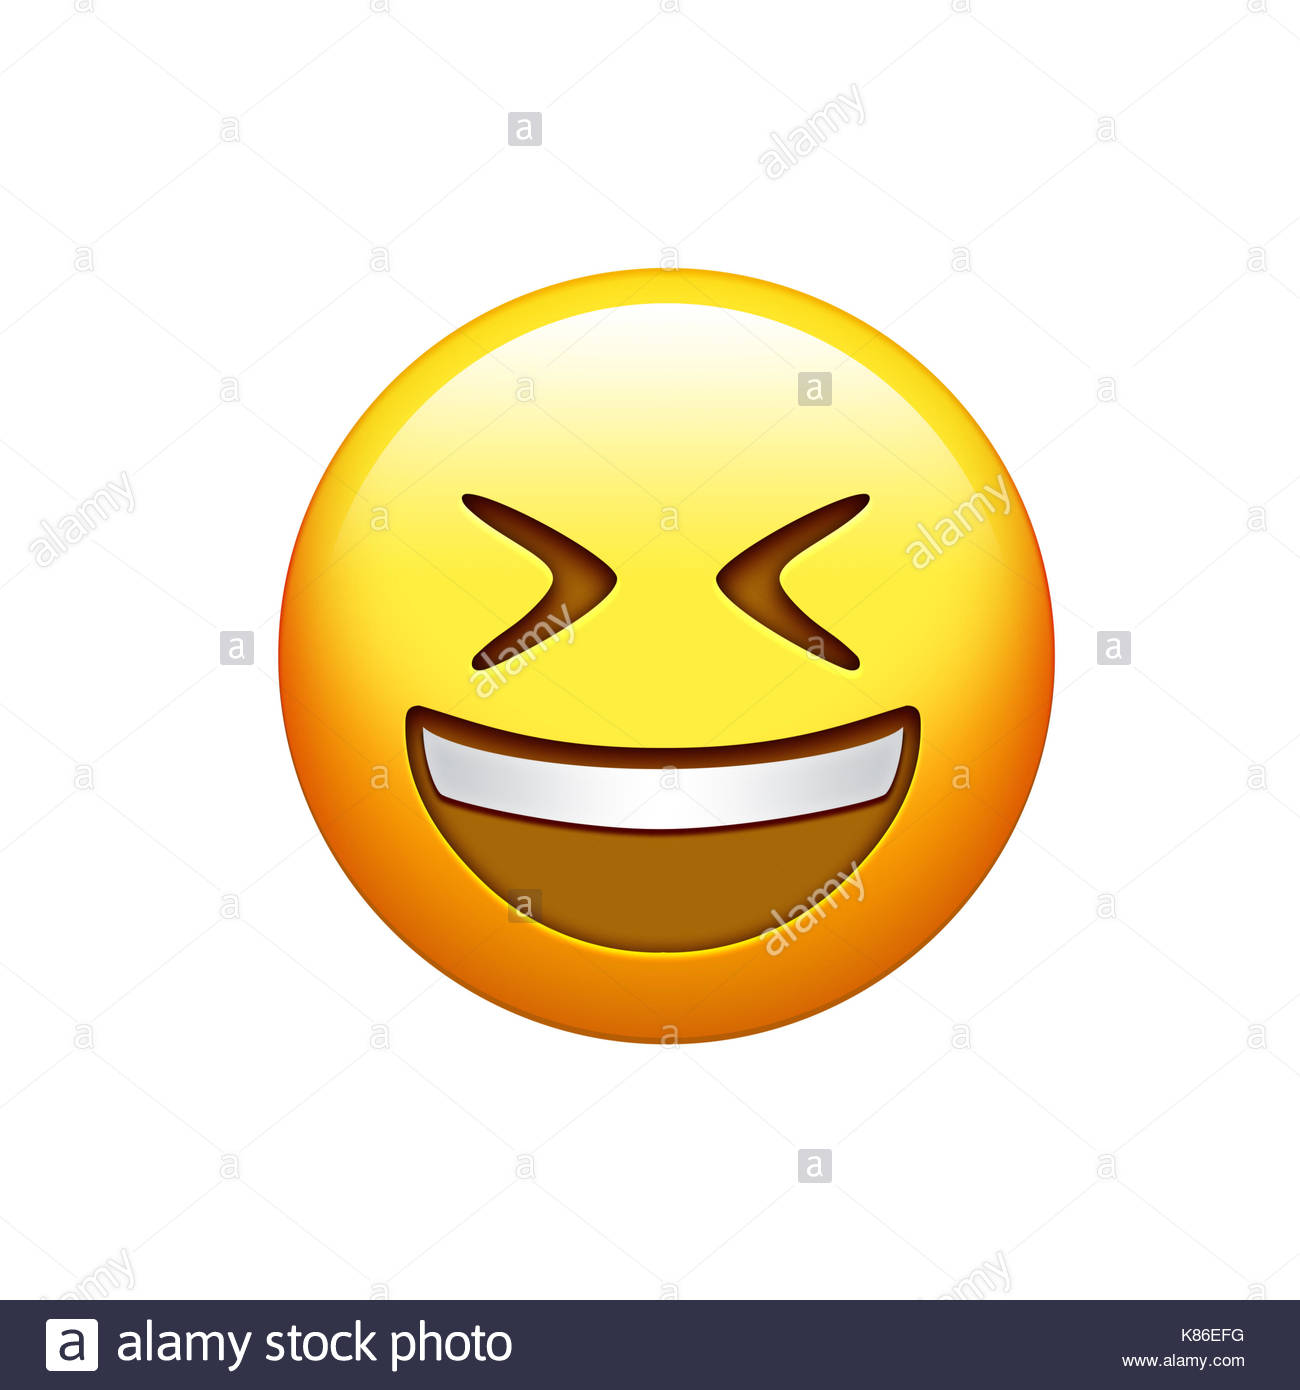 Laughing out loud emoticon | Stock Vector | Colourbox